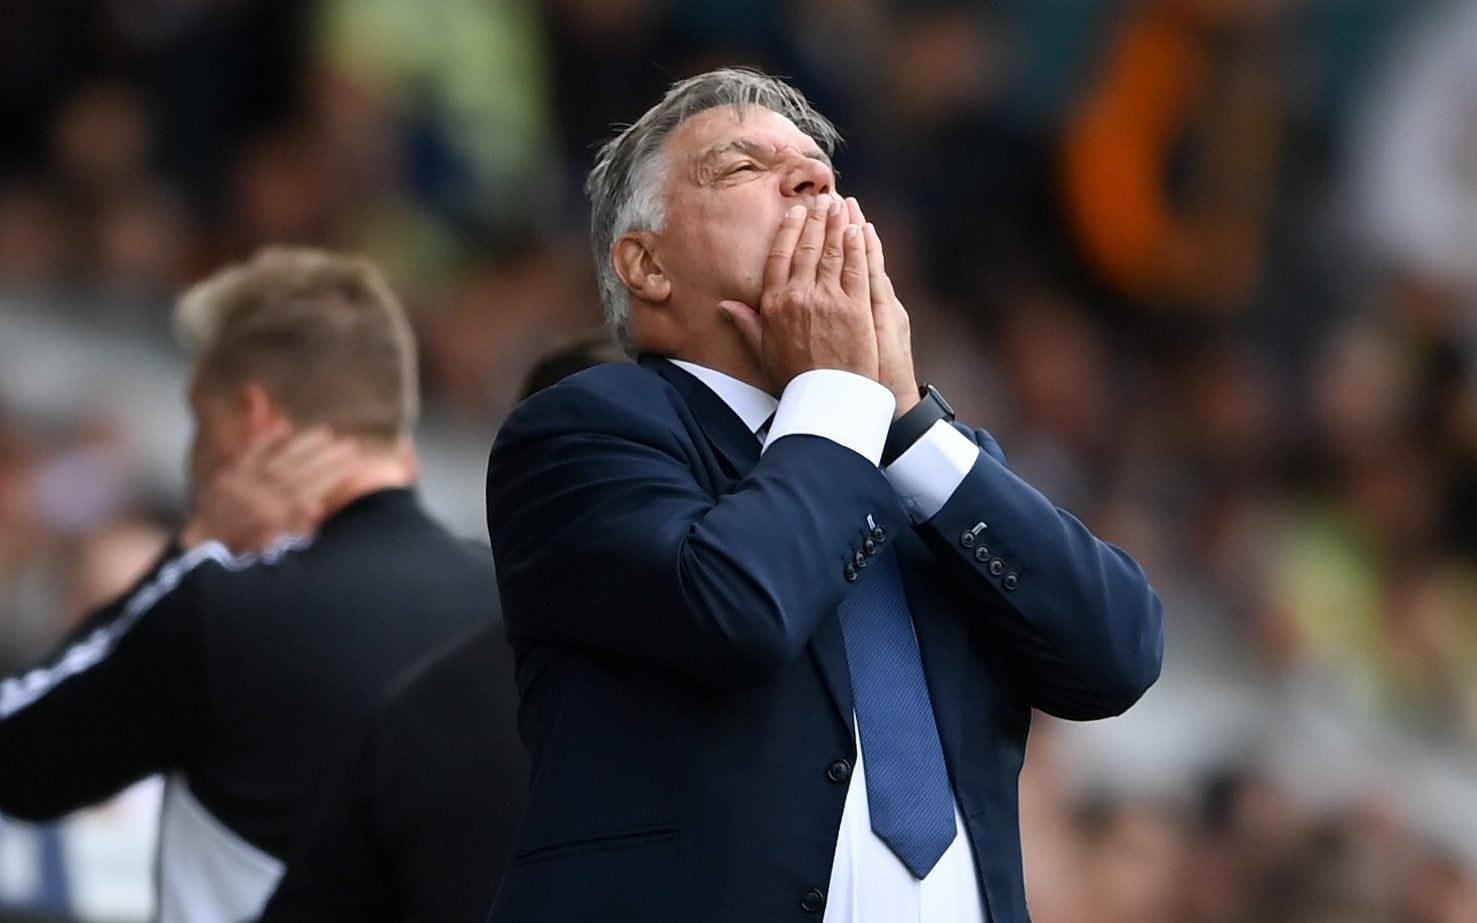 LEEDS UNITED OFFICIALLY PARTS WAYS WITH SAM ALLARDYCE AFTER A MONTH IN CHARGE